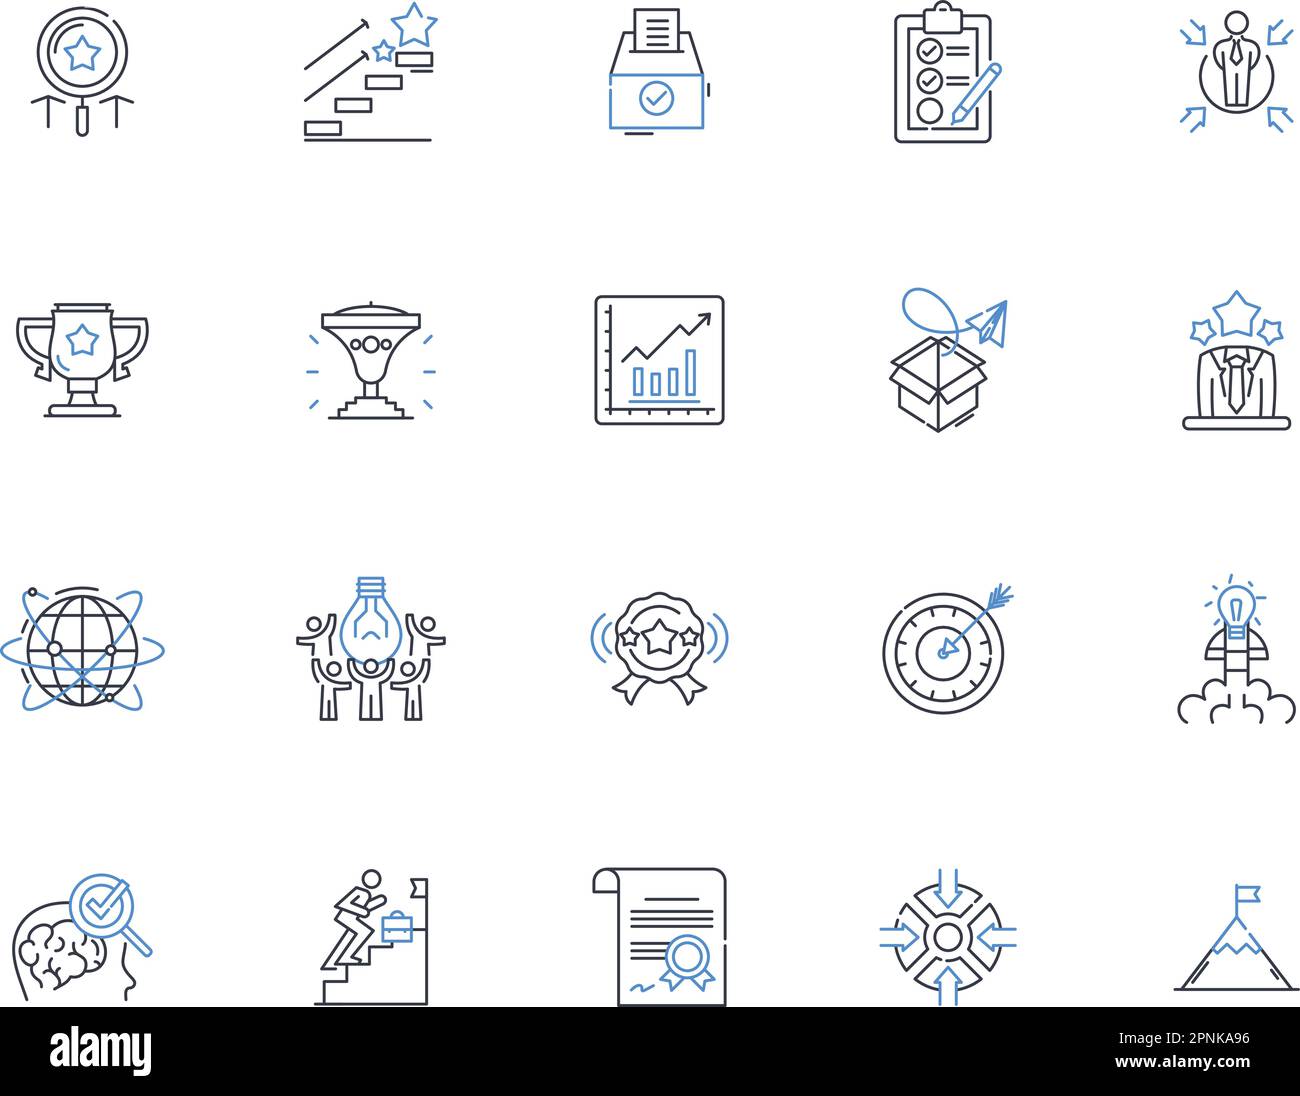 Desires line icons collection. Cravings, Longings, Urges, Hunger, Passions, Wants, Needs vector and linear illustration. Dreams,Aspirations,Ambitions Stock Vector